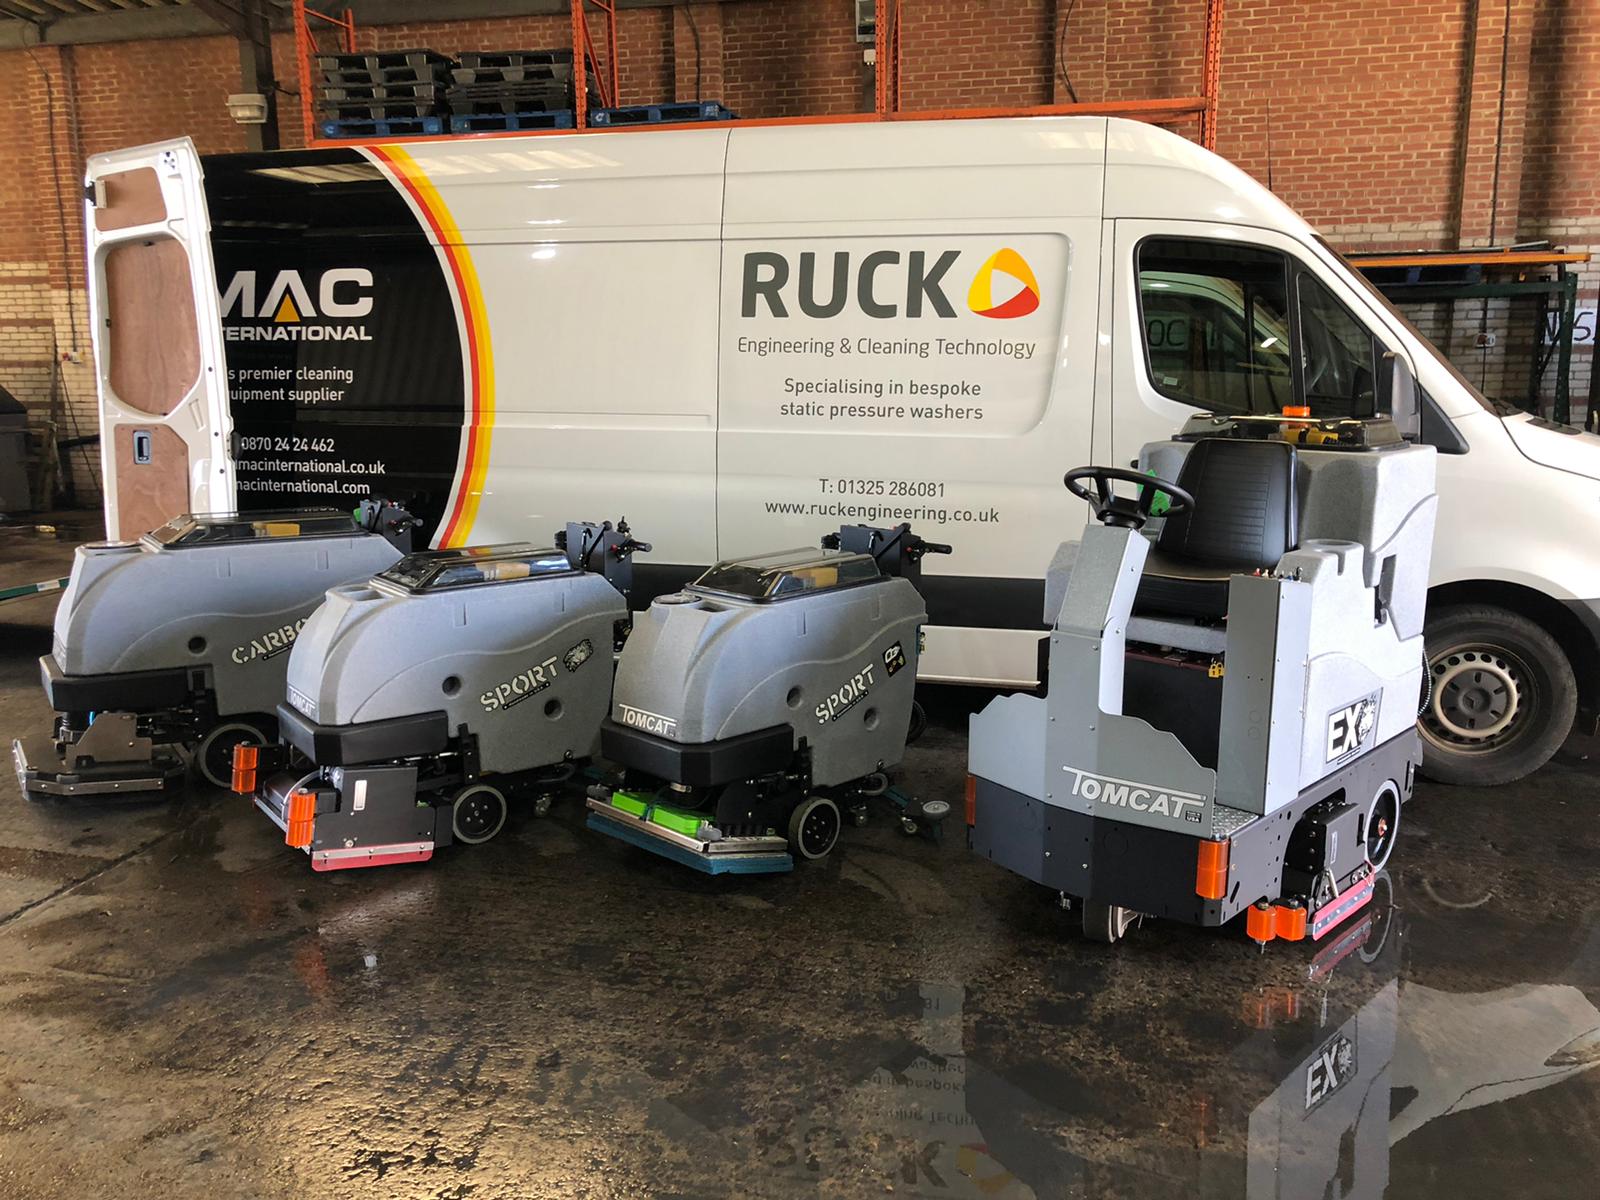 Ruck Engineering Supplying Cleaning Machines throughout the North East